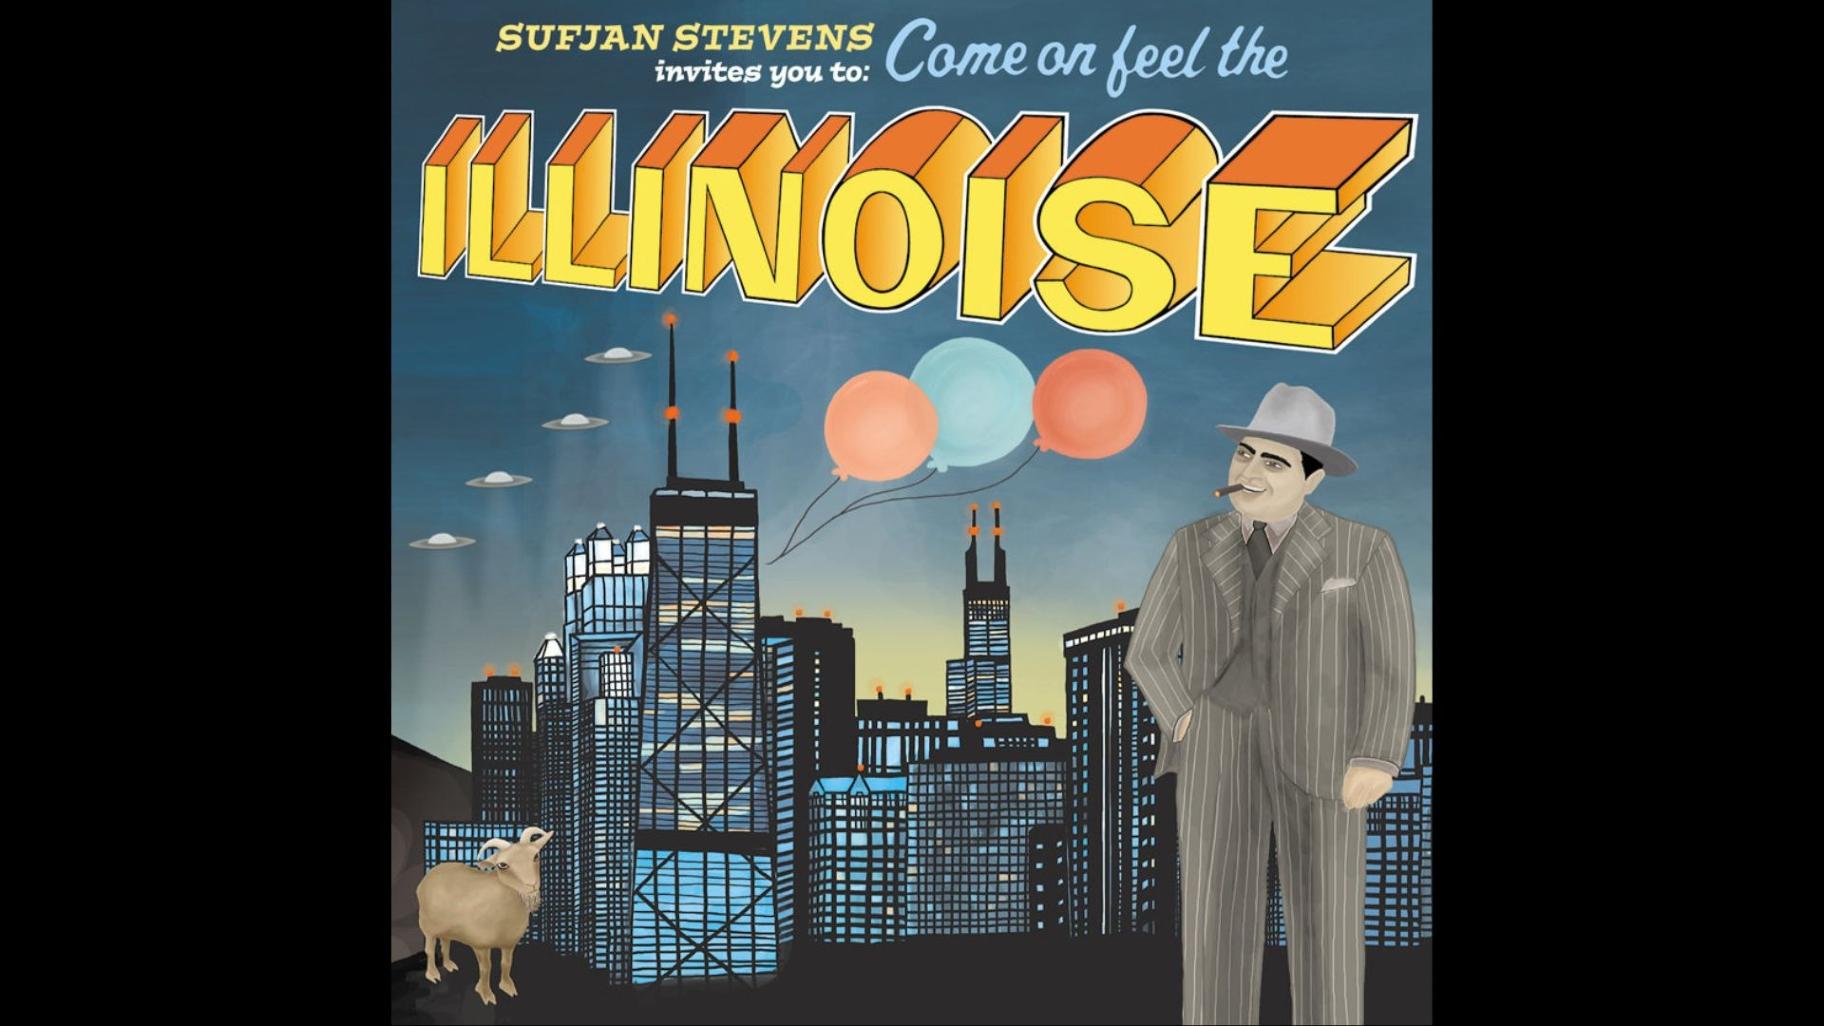 Sufjan Steven’s beloved 2005 album “Illinois” also has a longer title, “Sufjan Stevens Invites You to: Come on Feel the Illinoise.” (The “e” at the end of Illinoise comes and goes.)